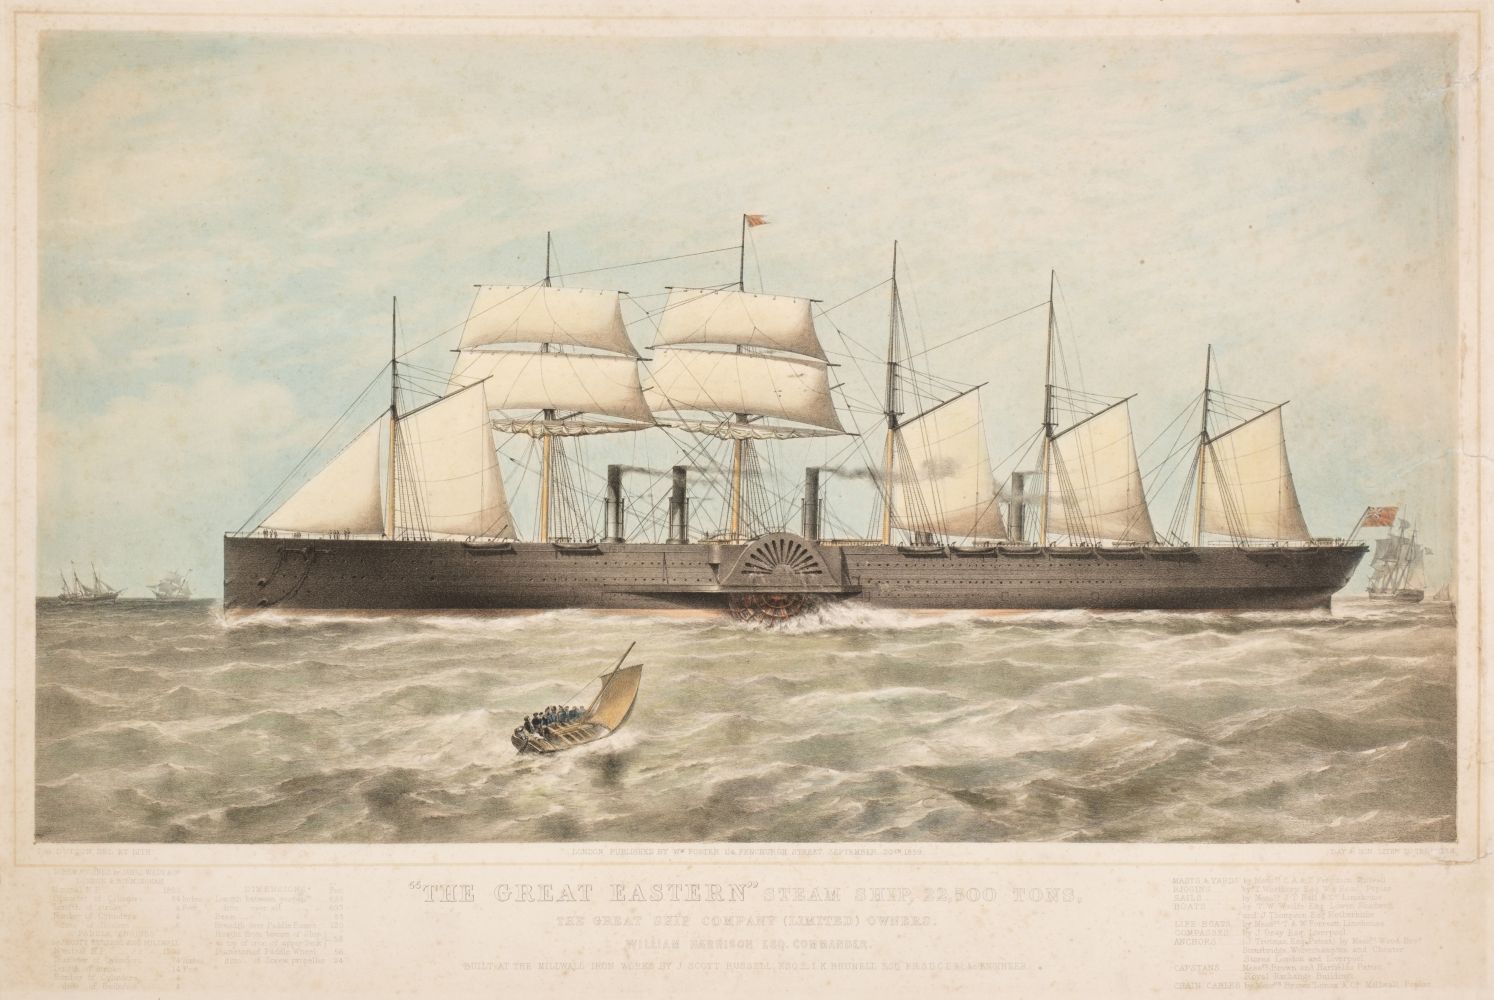 * Dutton (Thomas Goldsworthy). "The Great Eastern" Steam Ship, 22,500 Tons, 1859